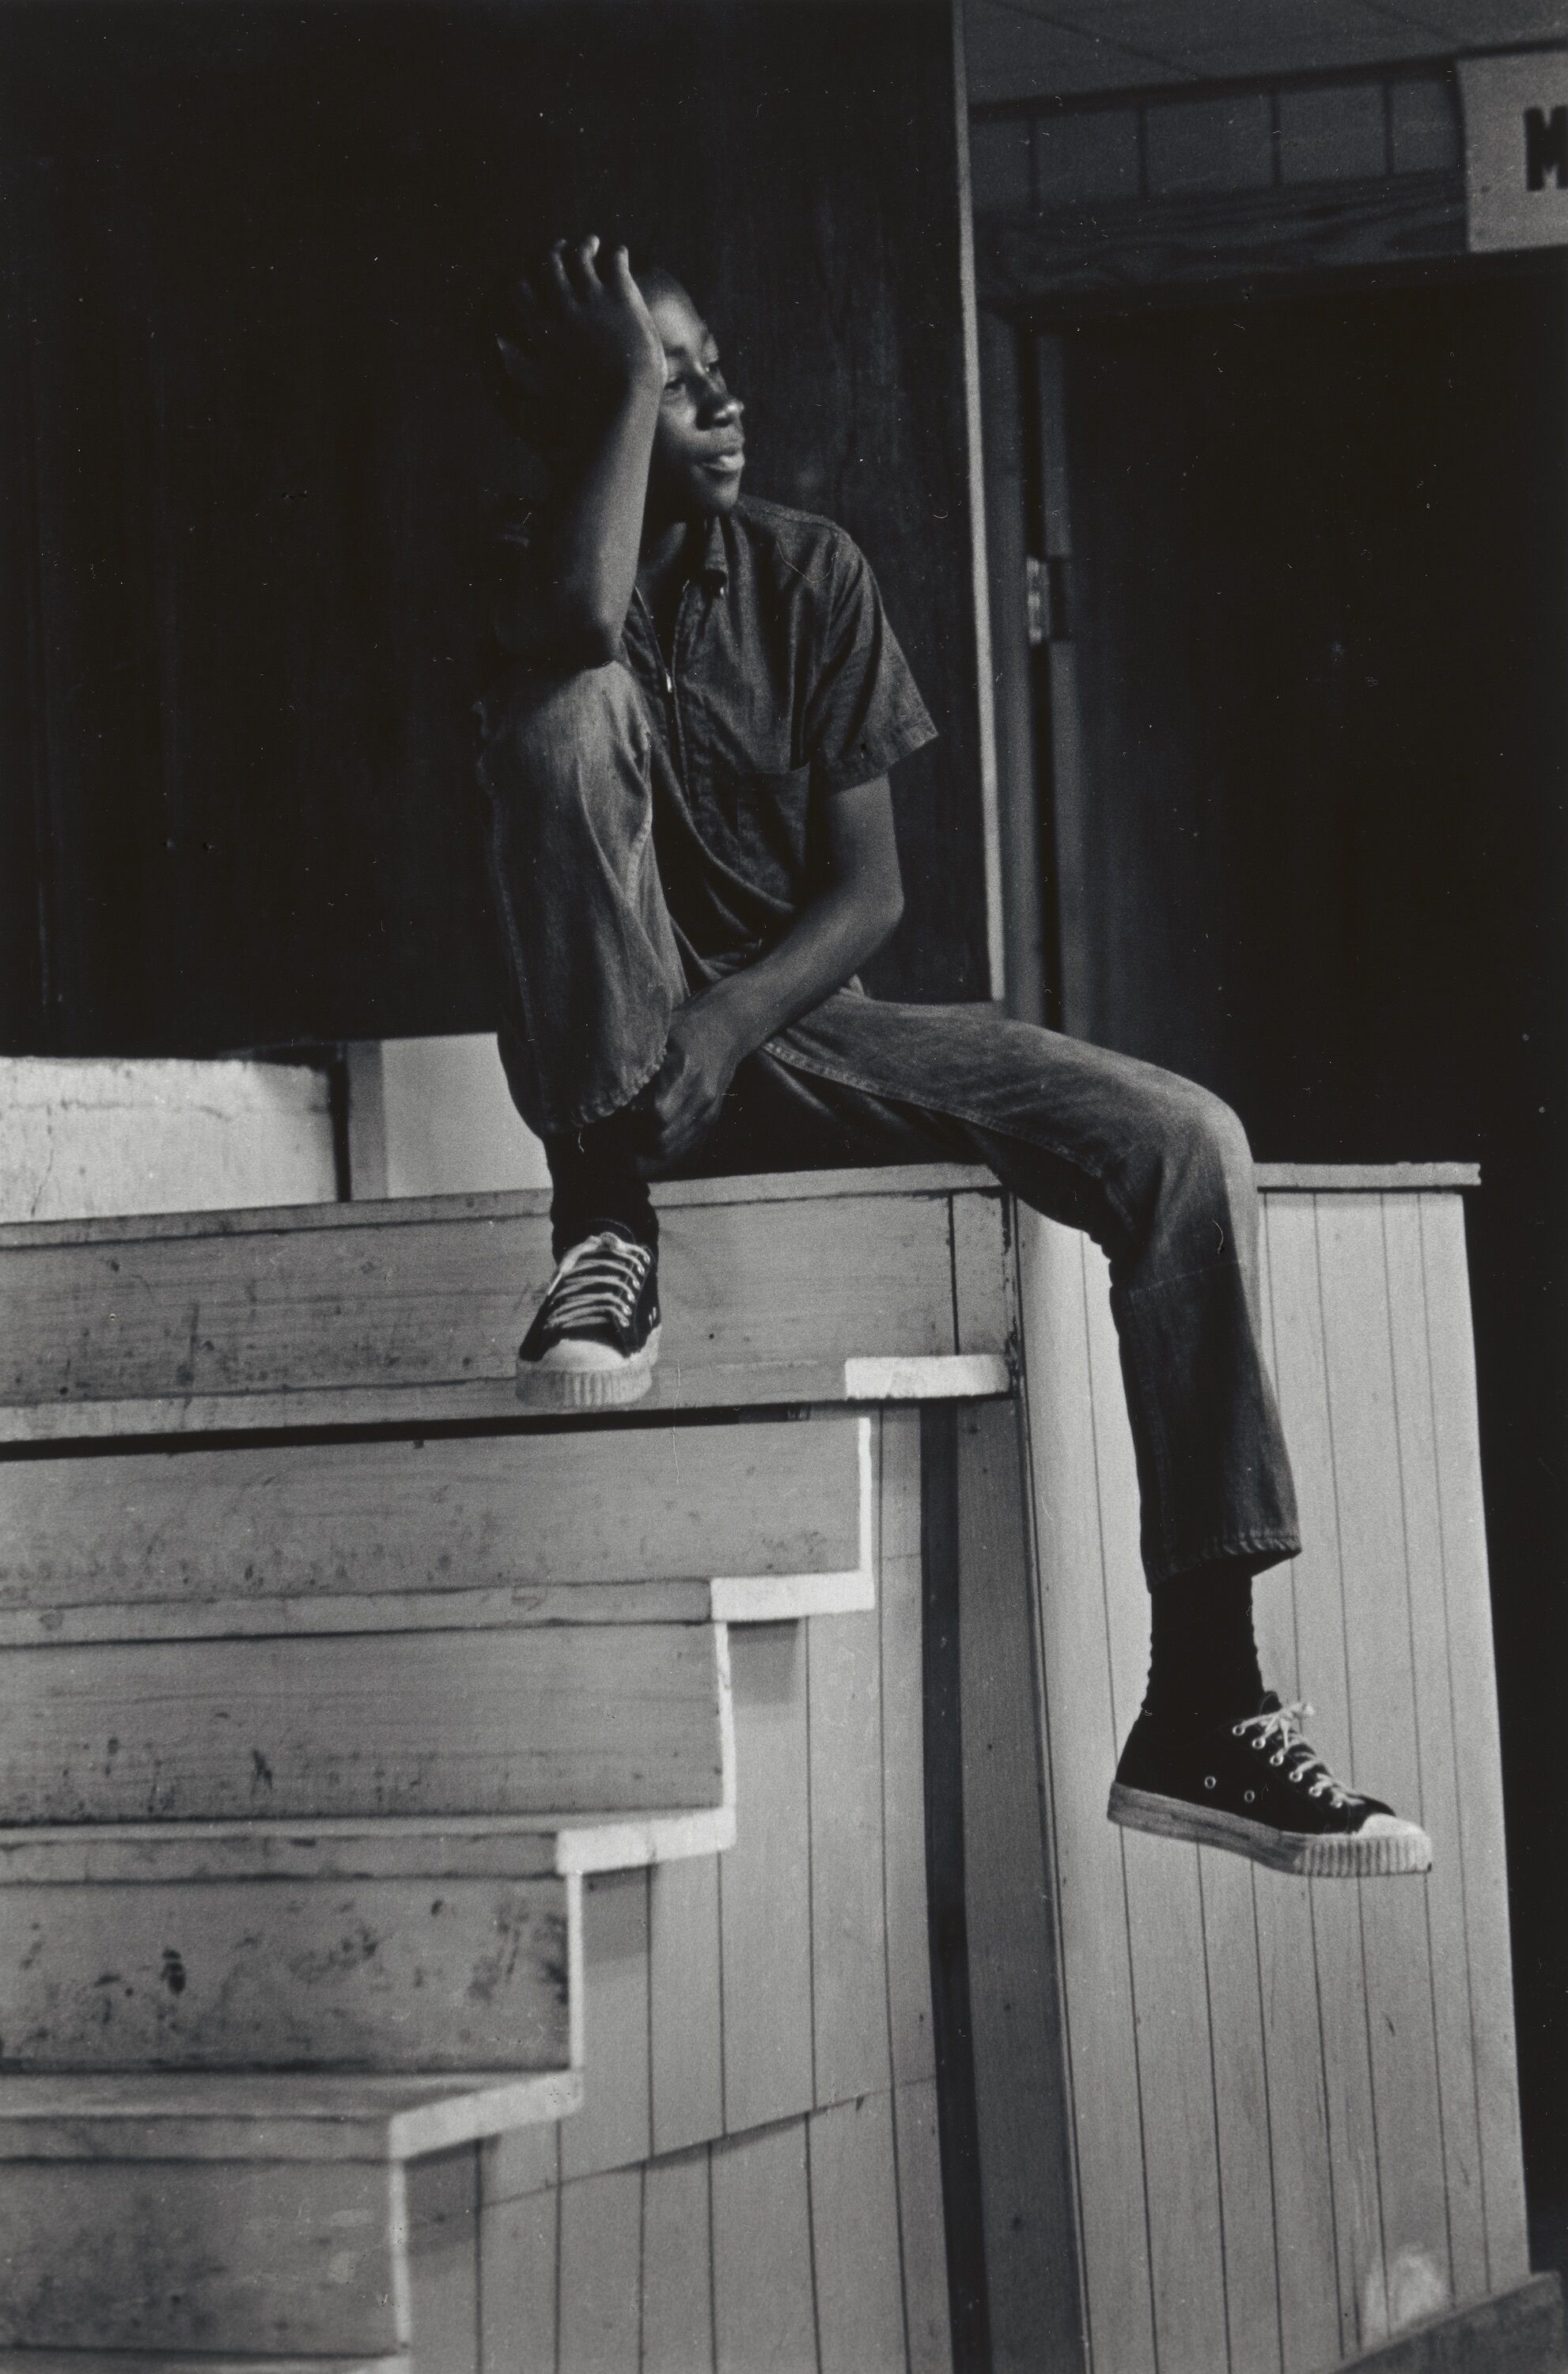 A person sitting at the top of a staircase.